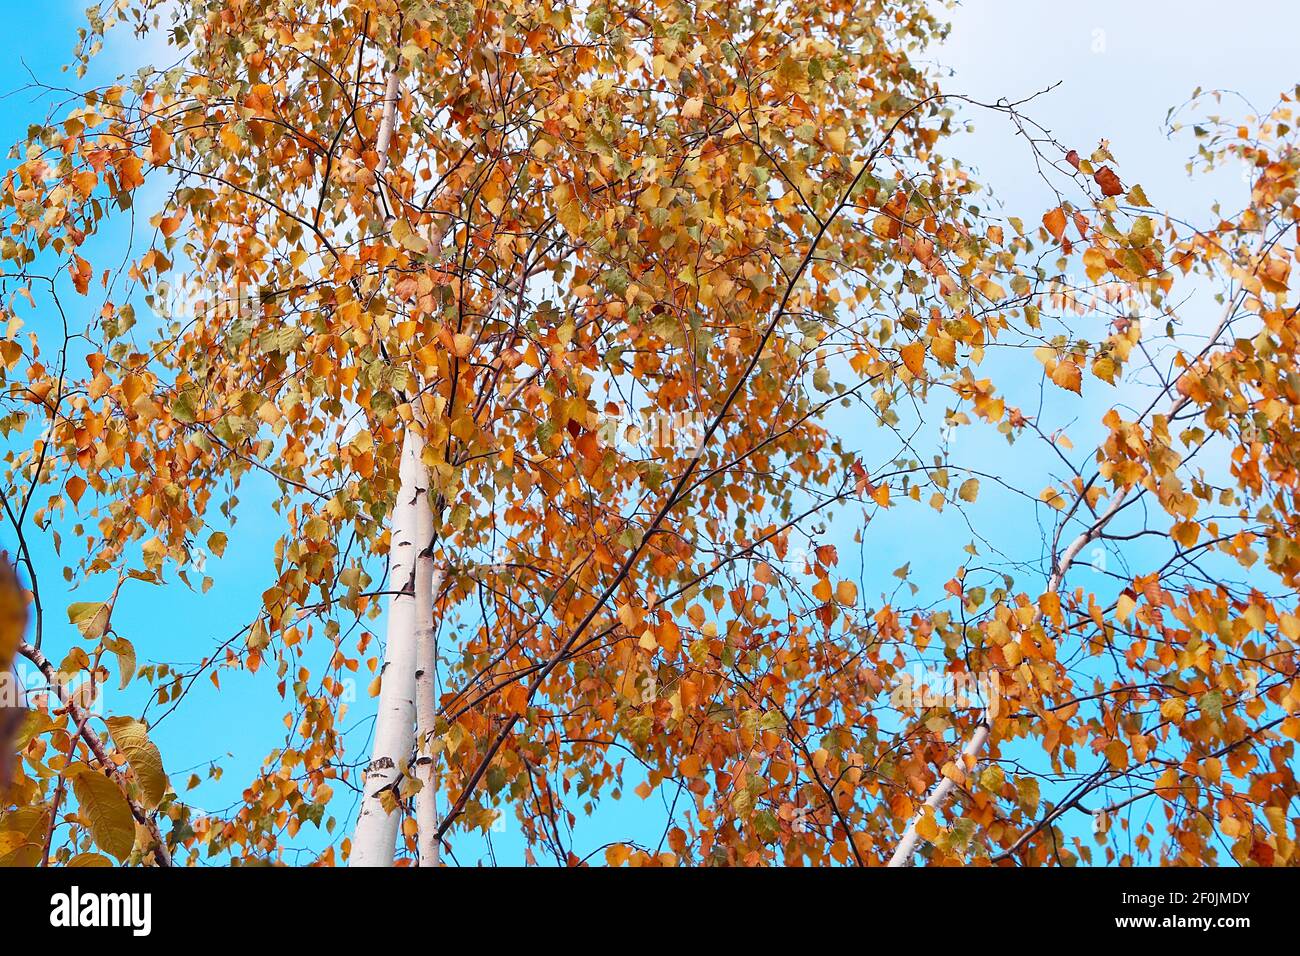 Birch with red autumn foliage over blue sky Stock Photo